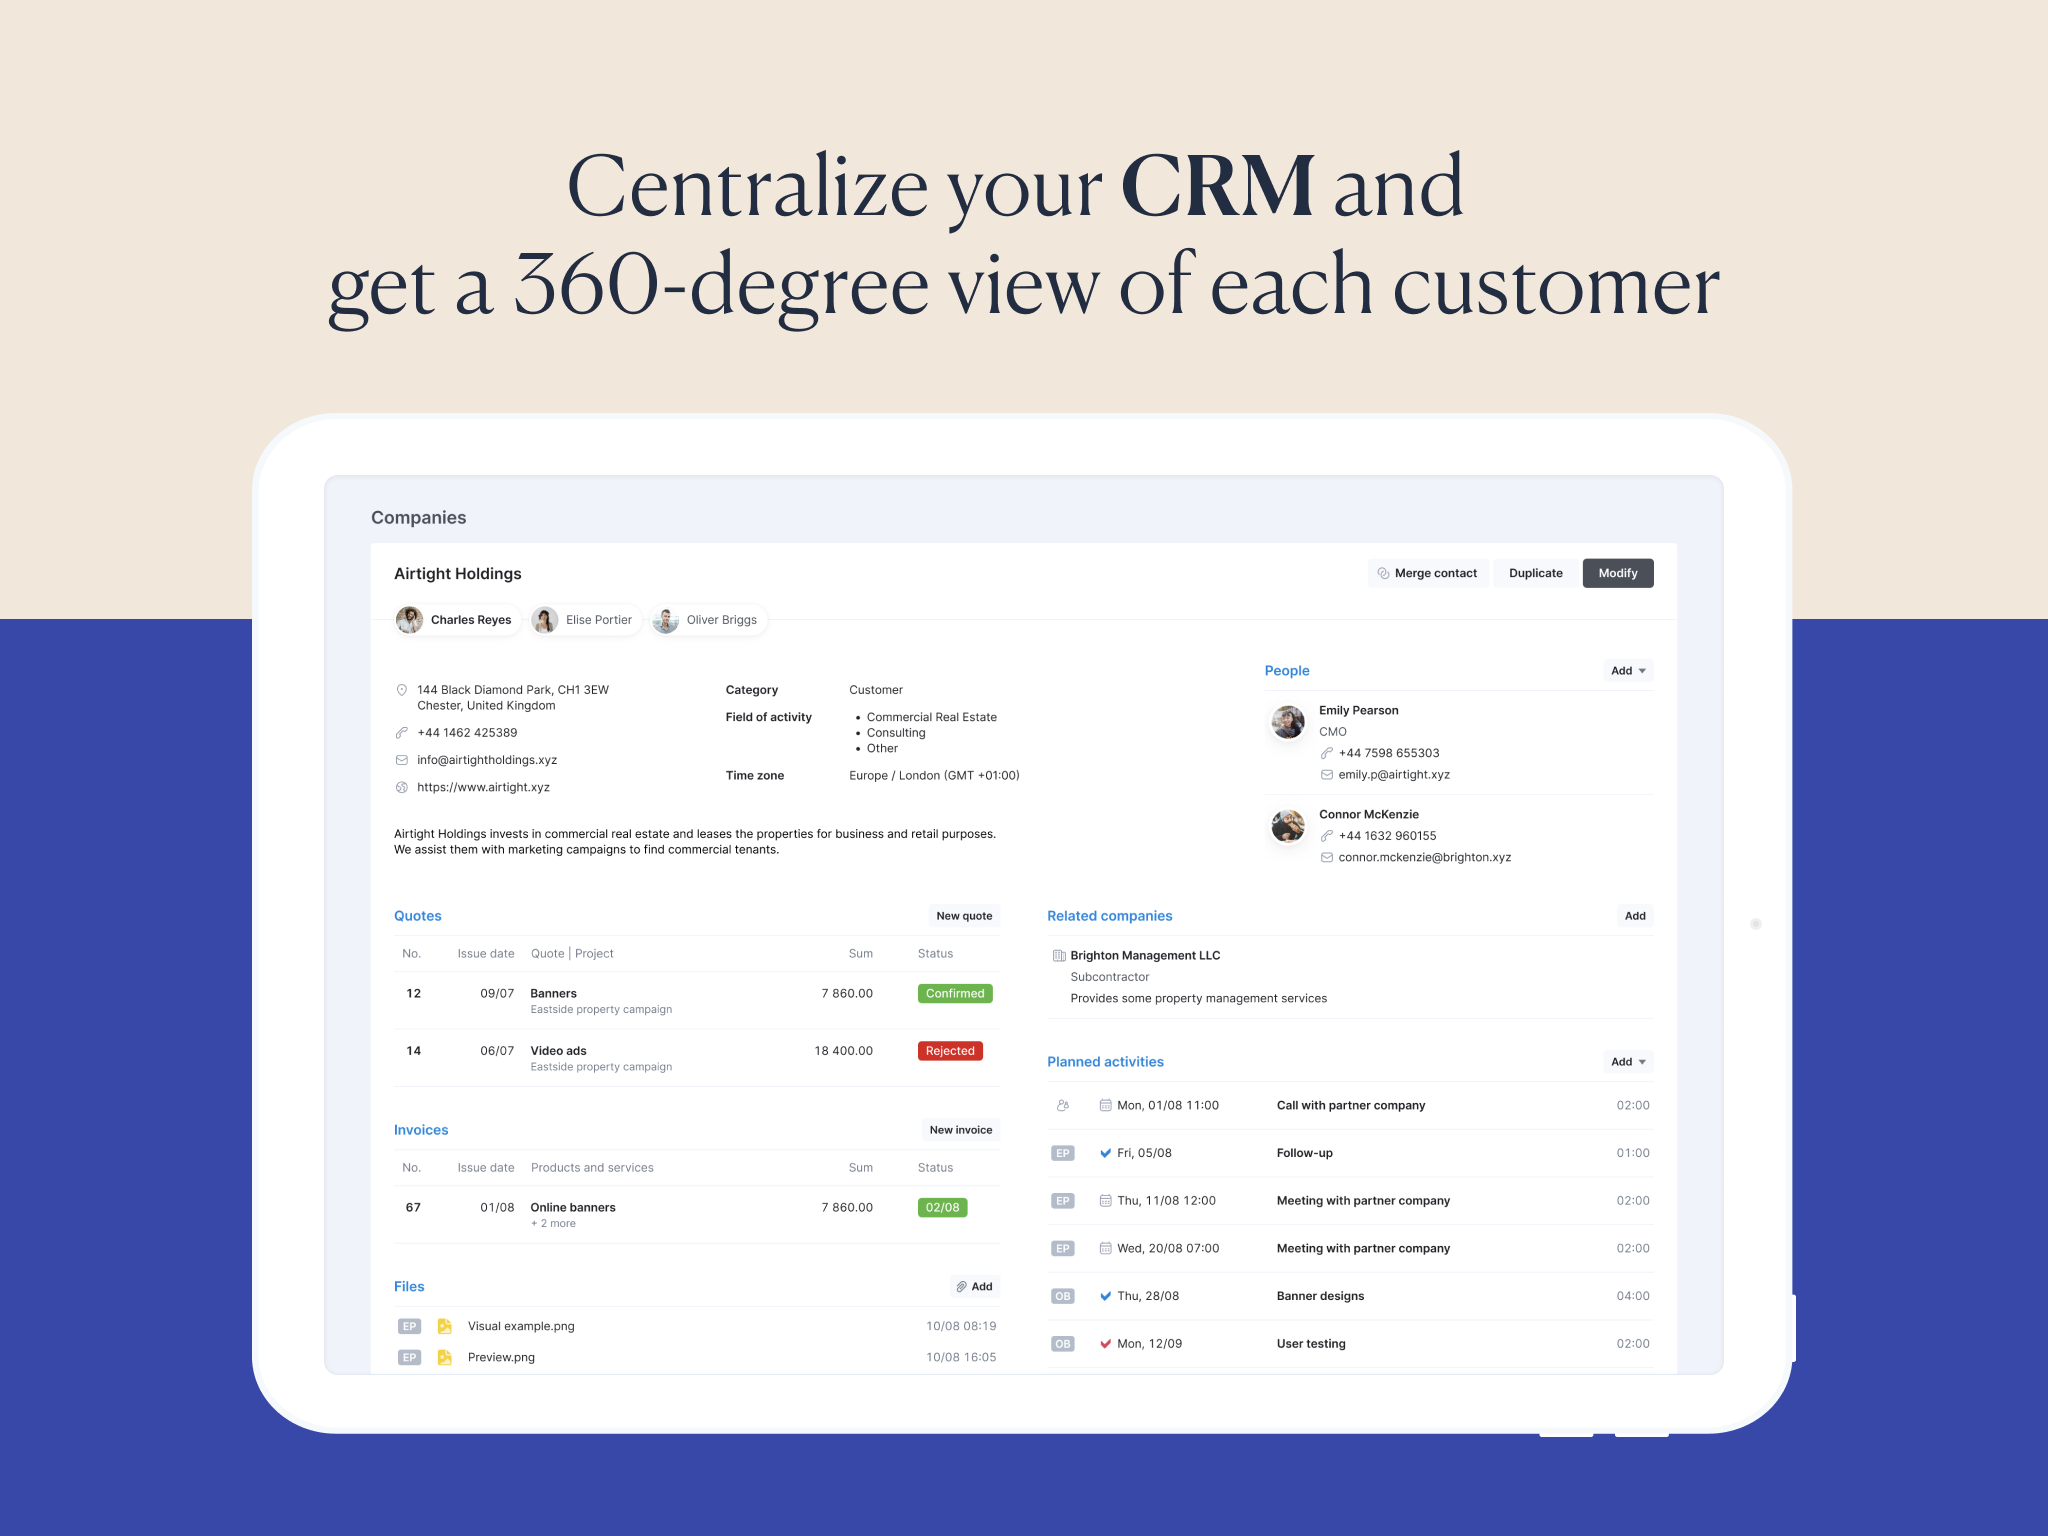 Centralized CRM